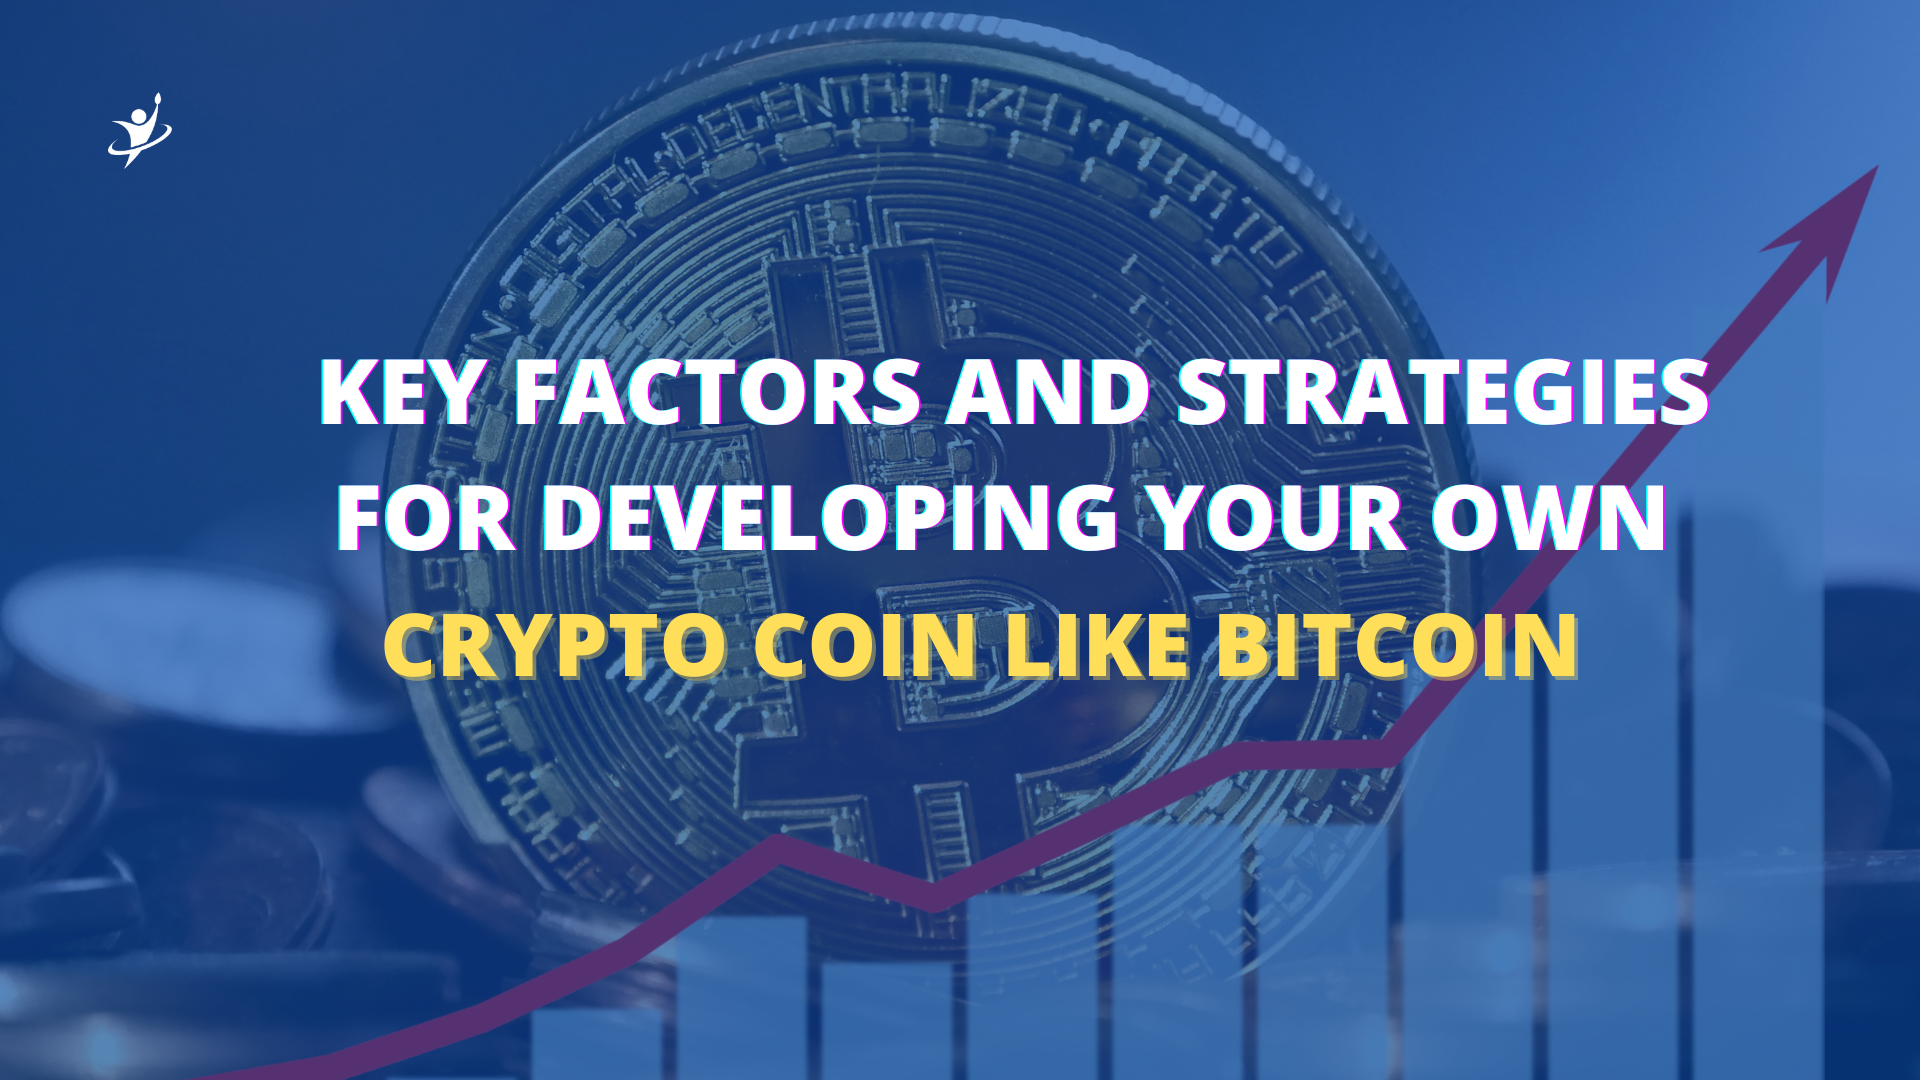 Key Factors and Strategies for Developing Your Own Crypto Coin Like Bitcoin